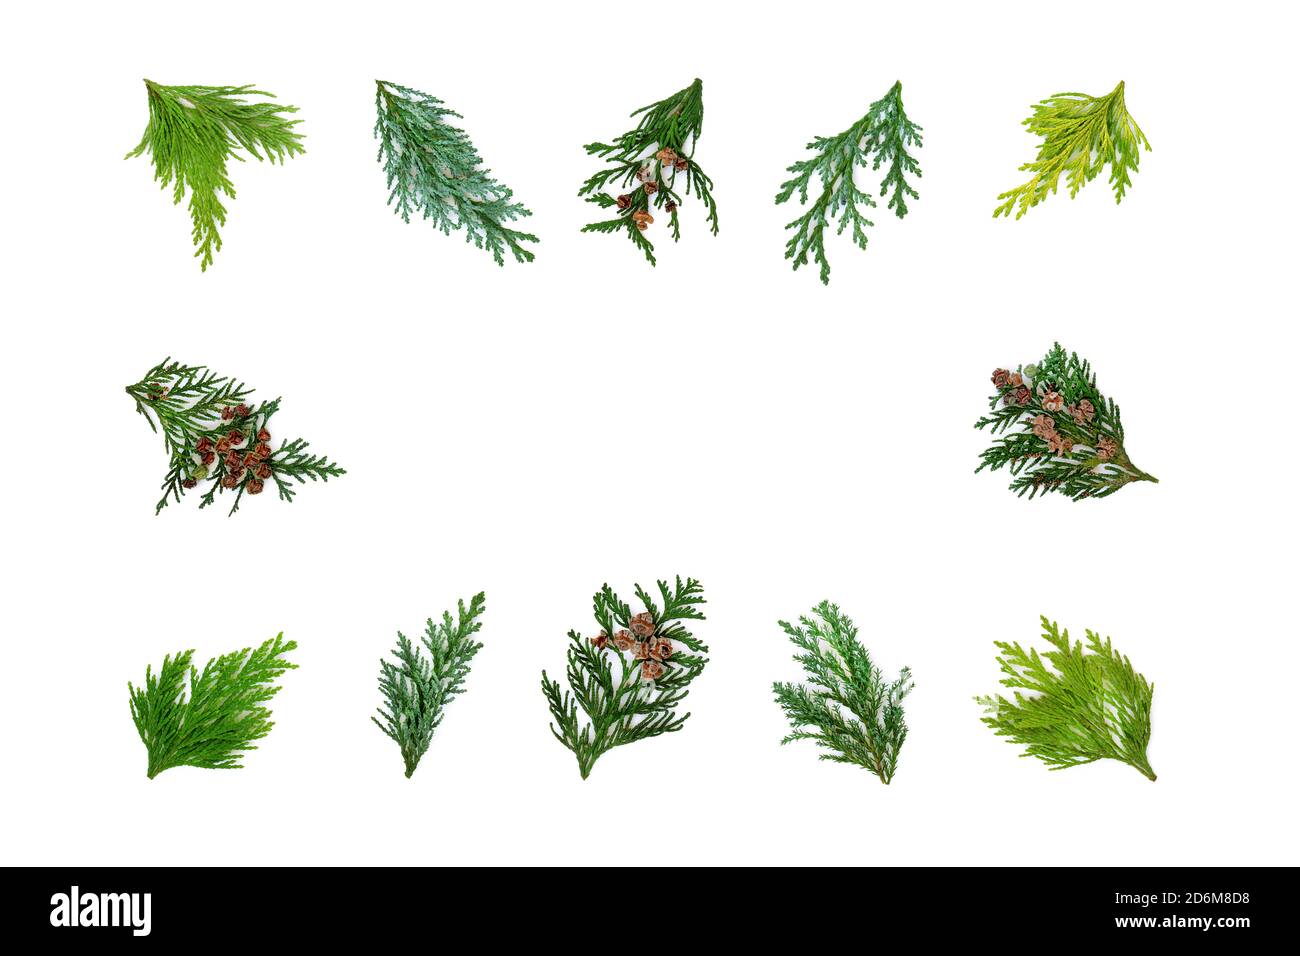 Cedar cypress leaf collection forming an abstract border on white background. Top view, flat lay, copy space. Stock Photo